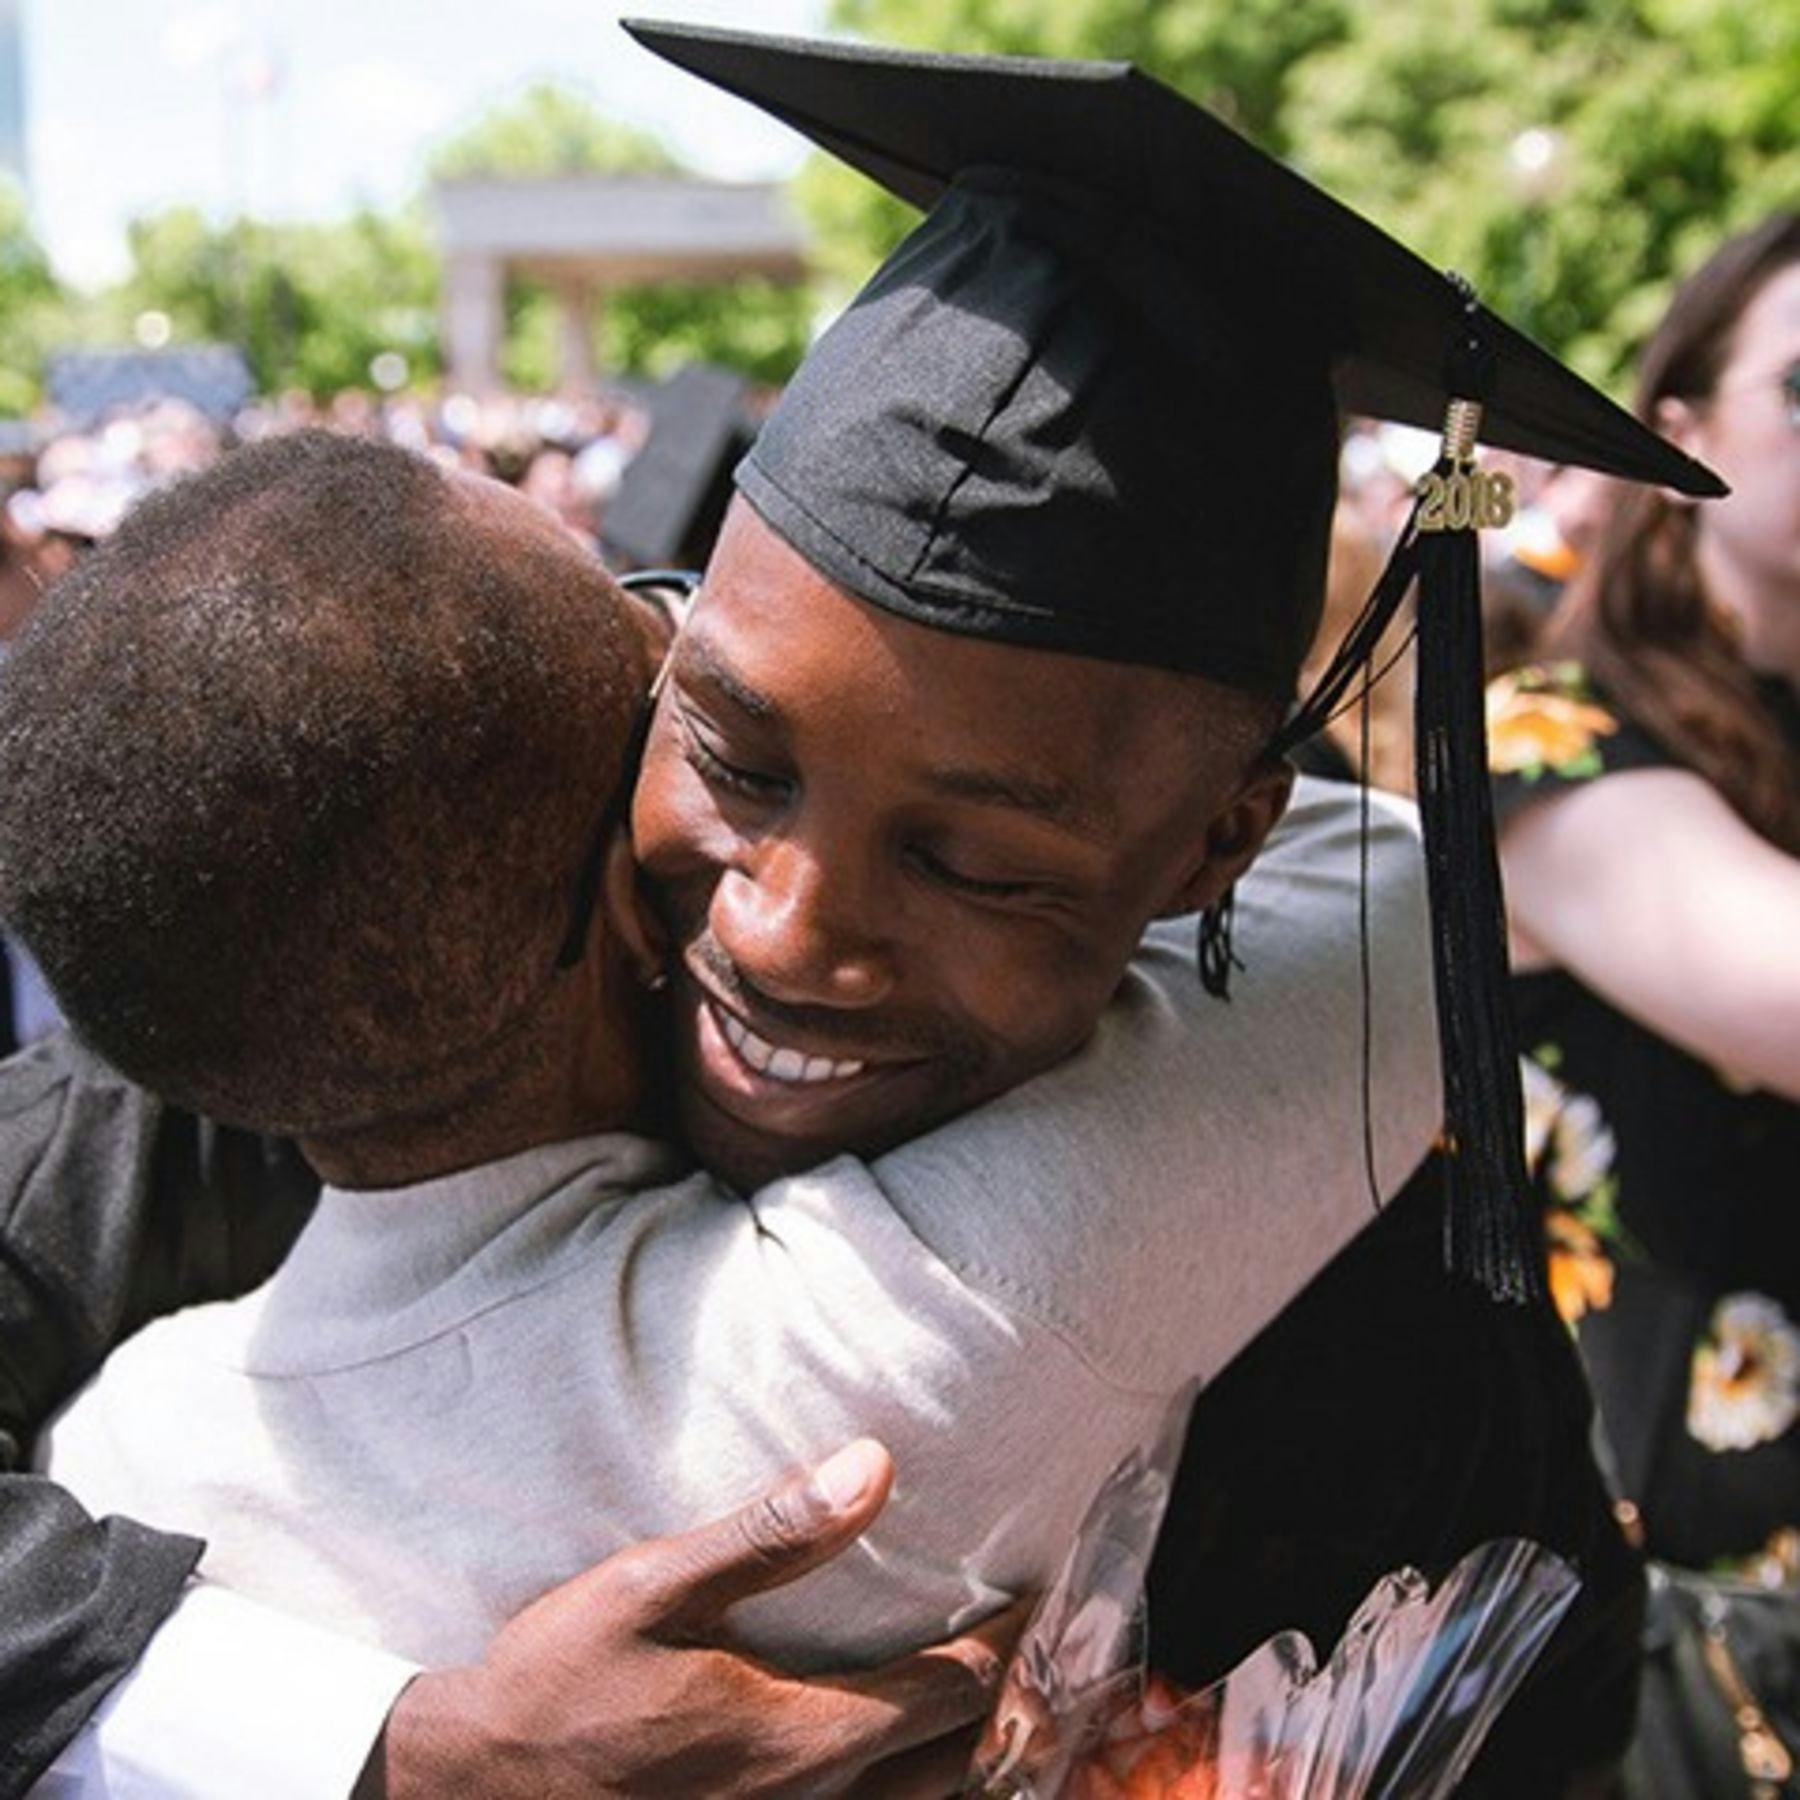 A young man in graduation regalia embraces his mother at commencement.